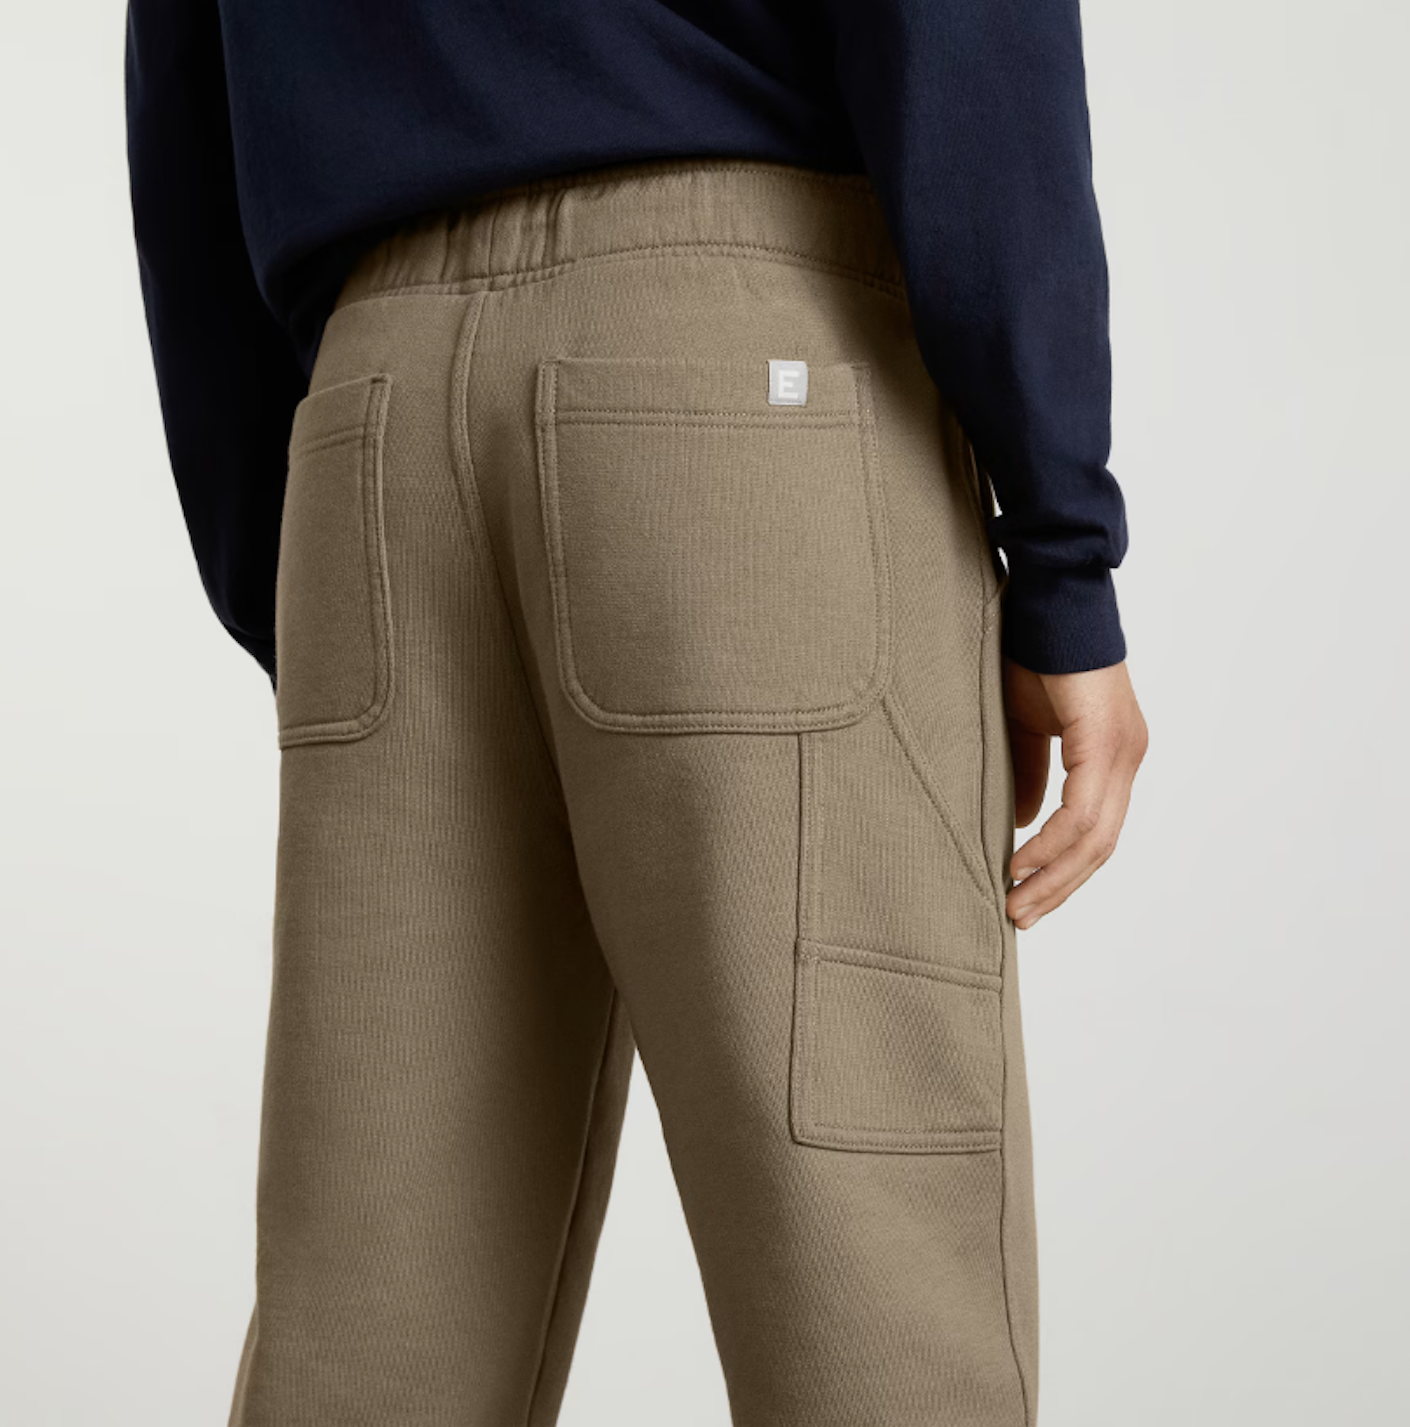 The back of structured brown sweatpants with large pockets.